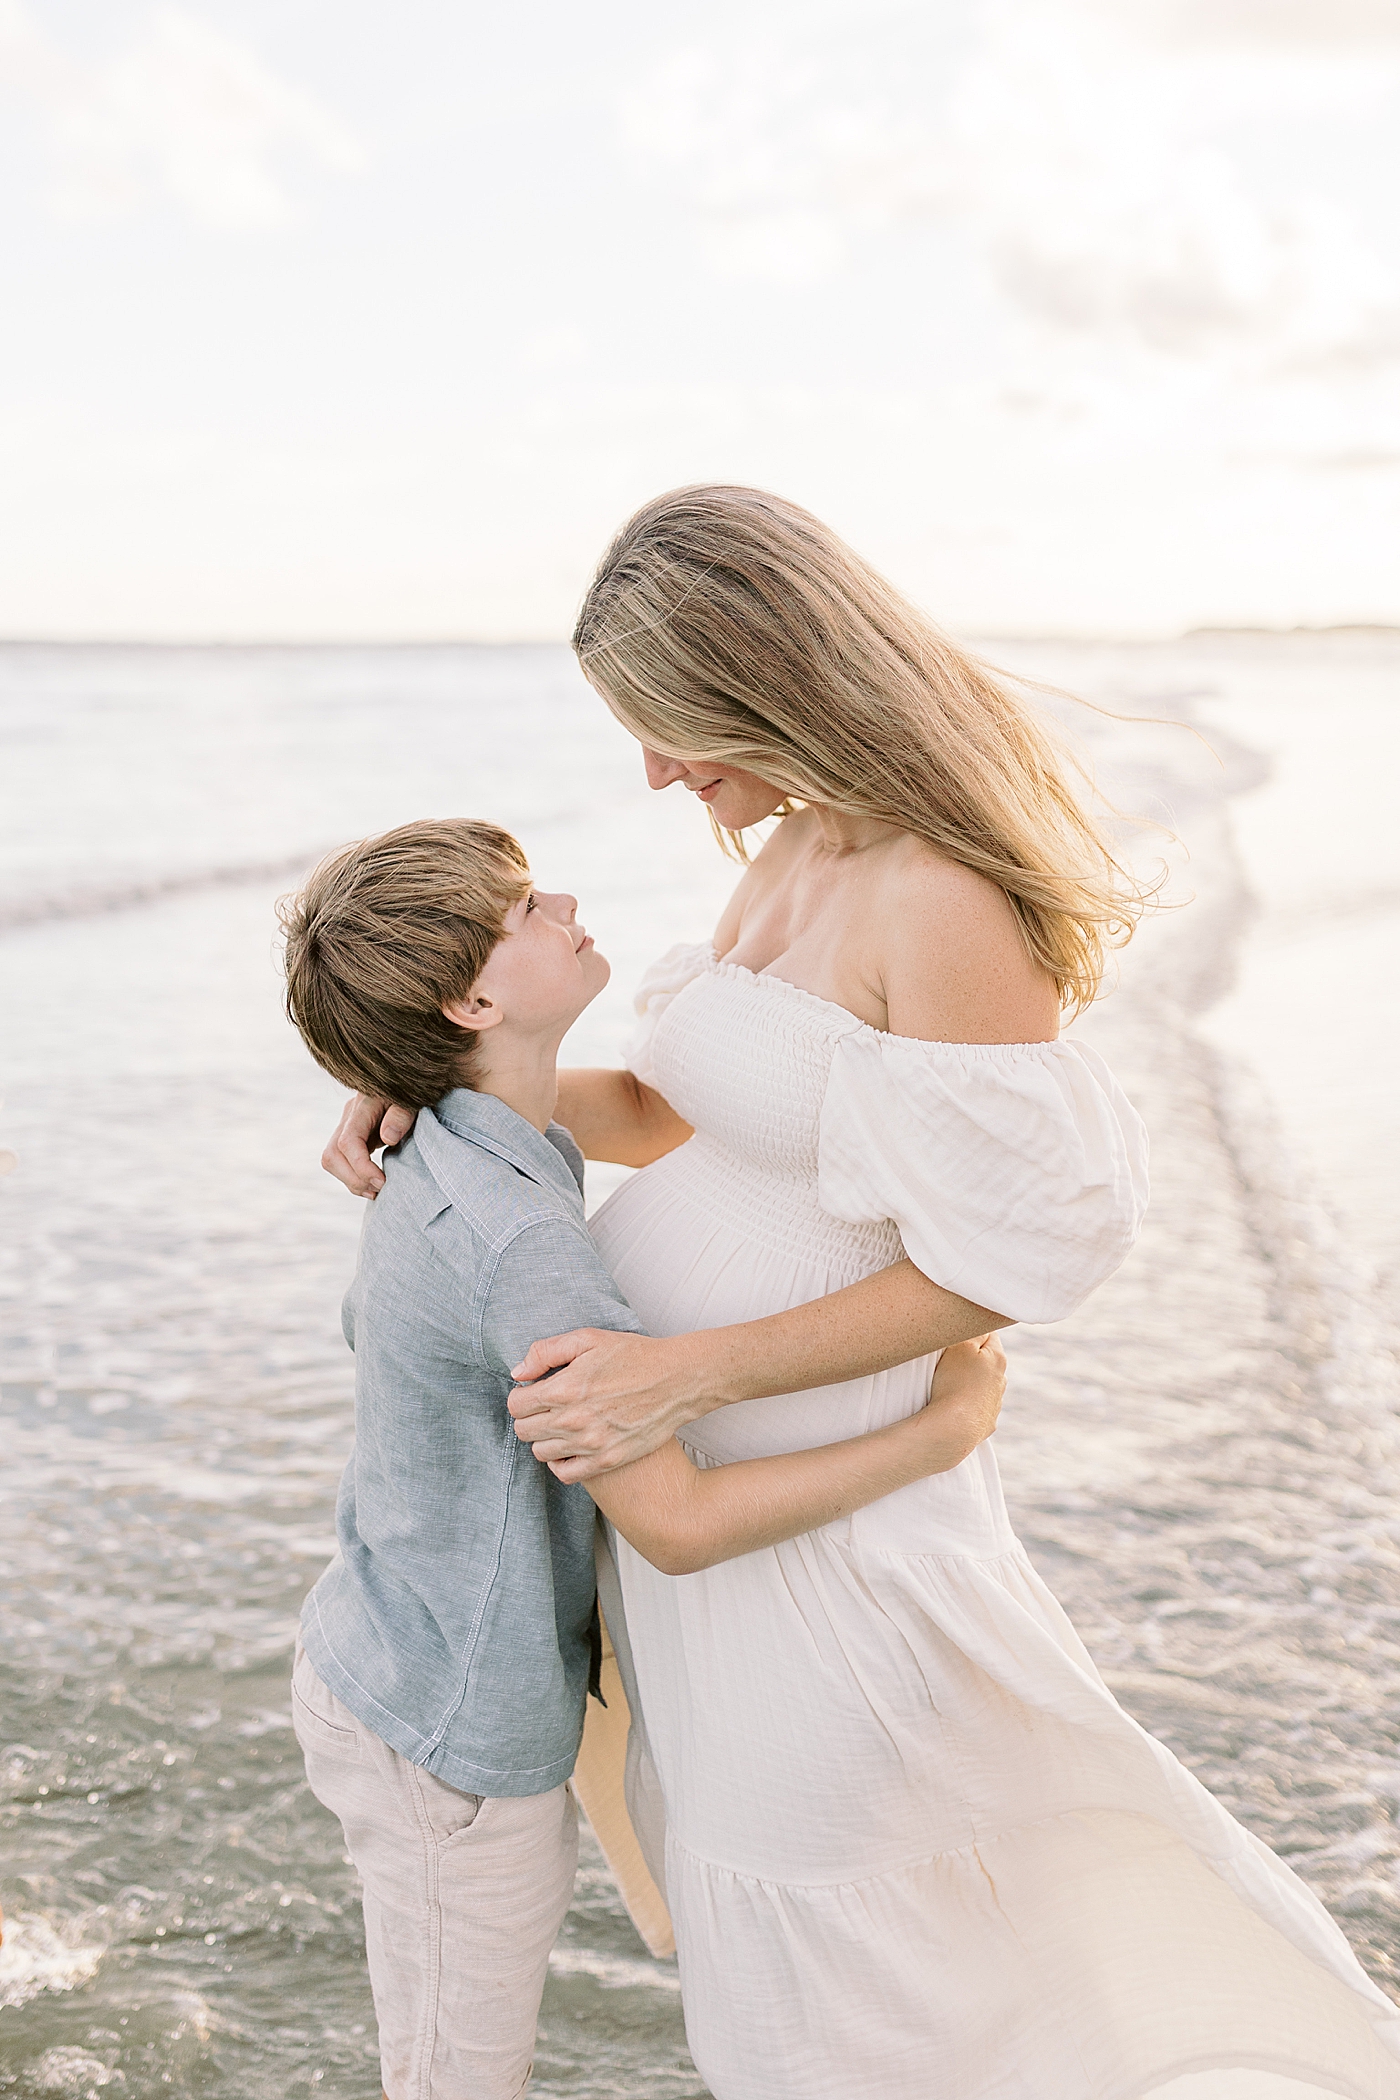 Little boy and mom interacting on the beach during maternity session | Image by Caitlyn Motycka